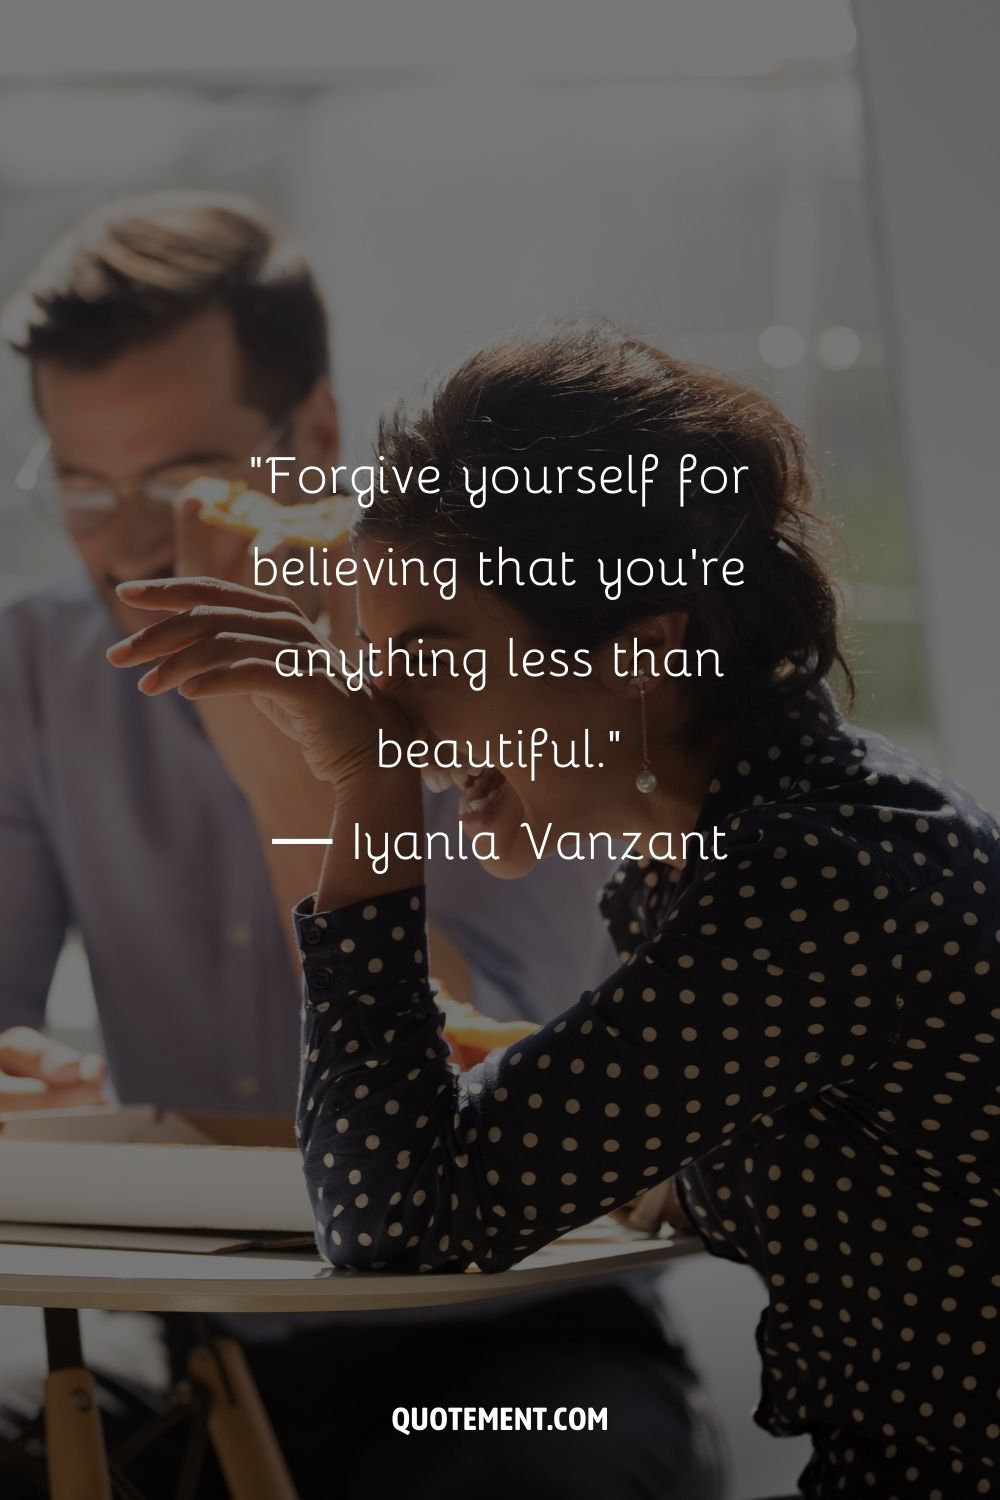 Forgive yourself for believing that you're anything less than beautiful. ― Iyanla Vanzant